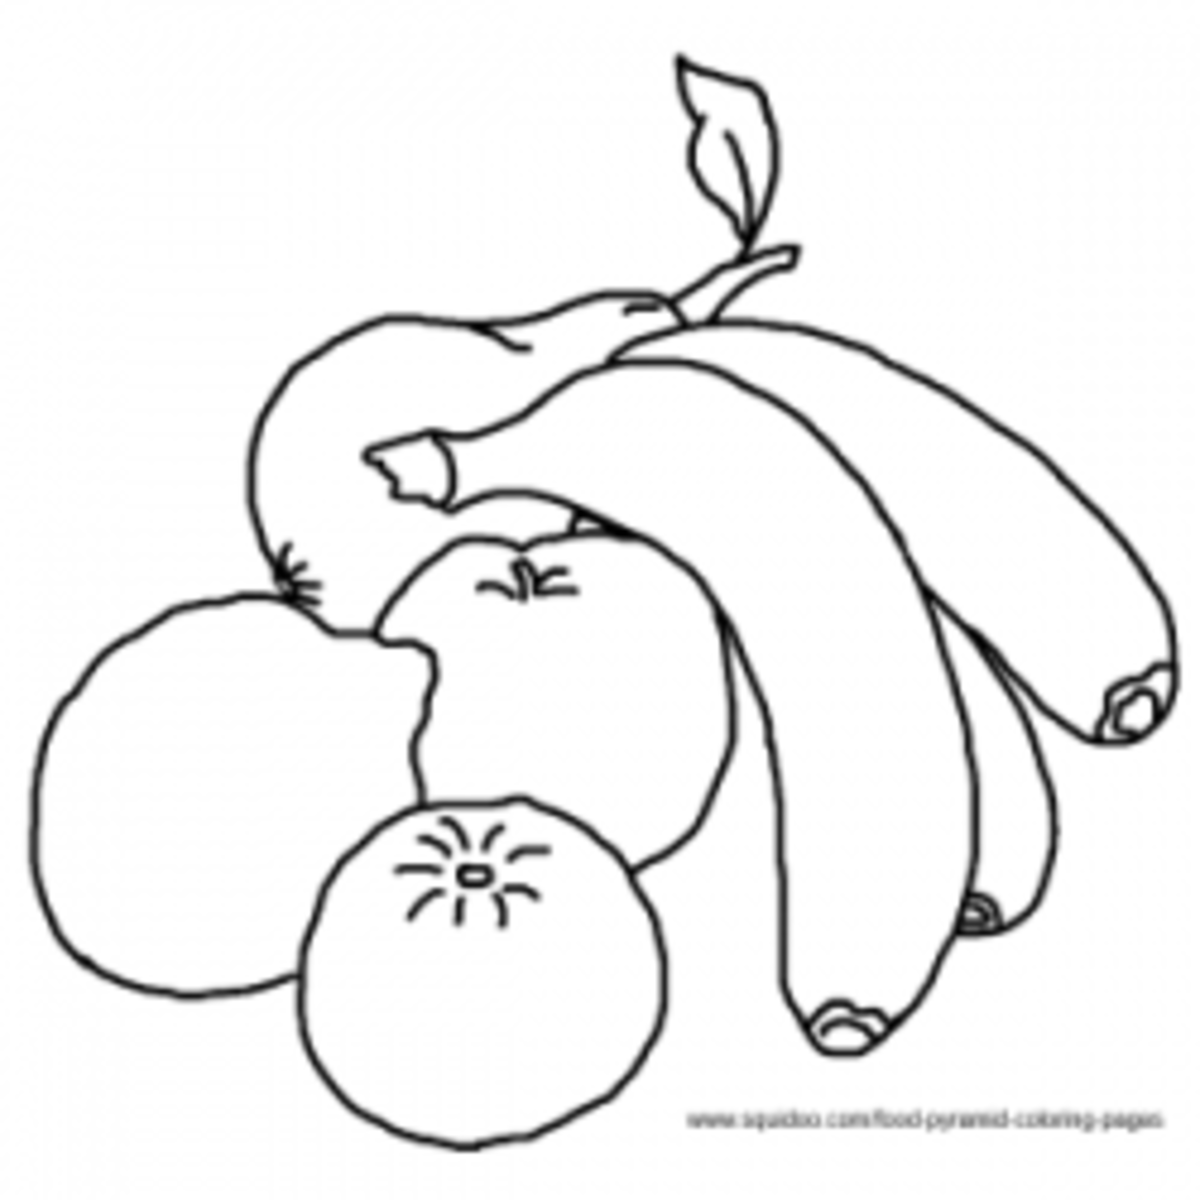 Food Pyramid Coloring Pages - HubPagesdiscover.hubpages.com